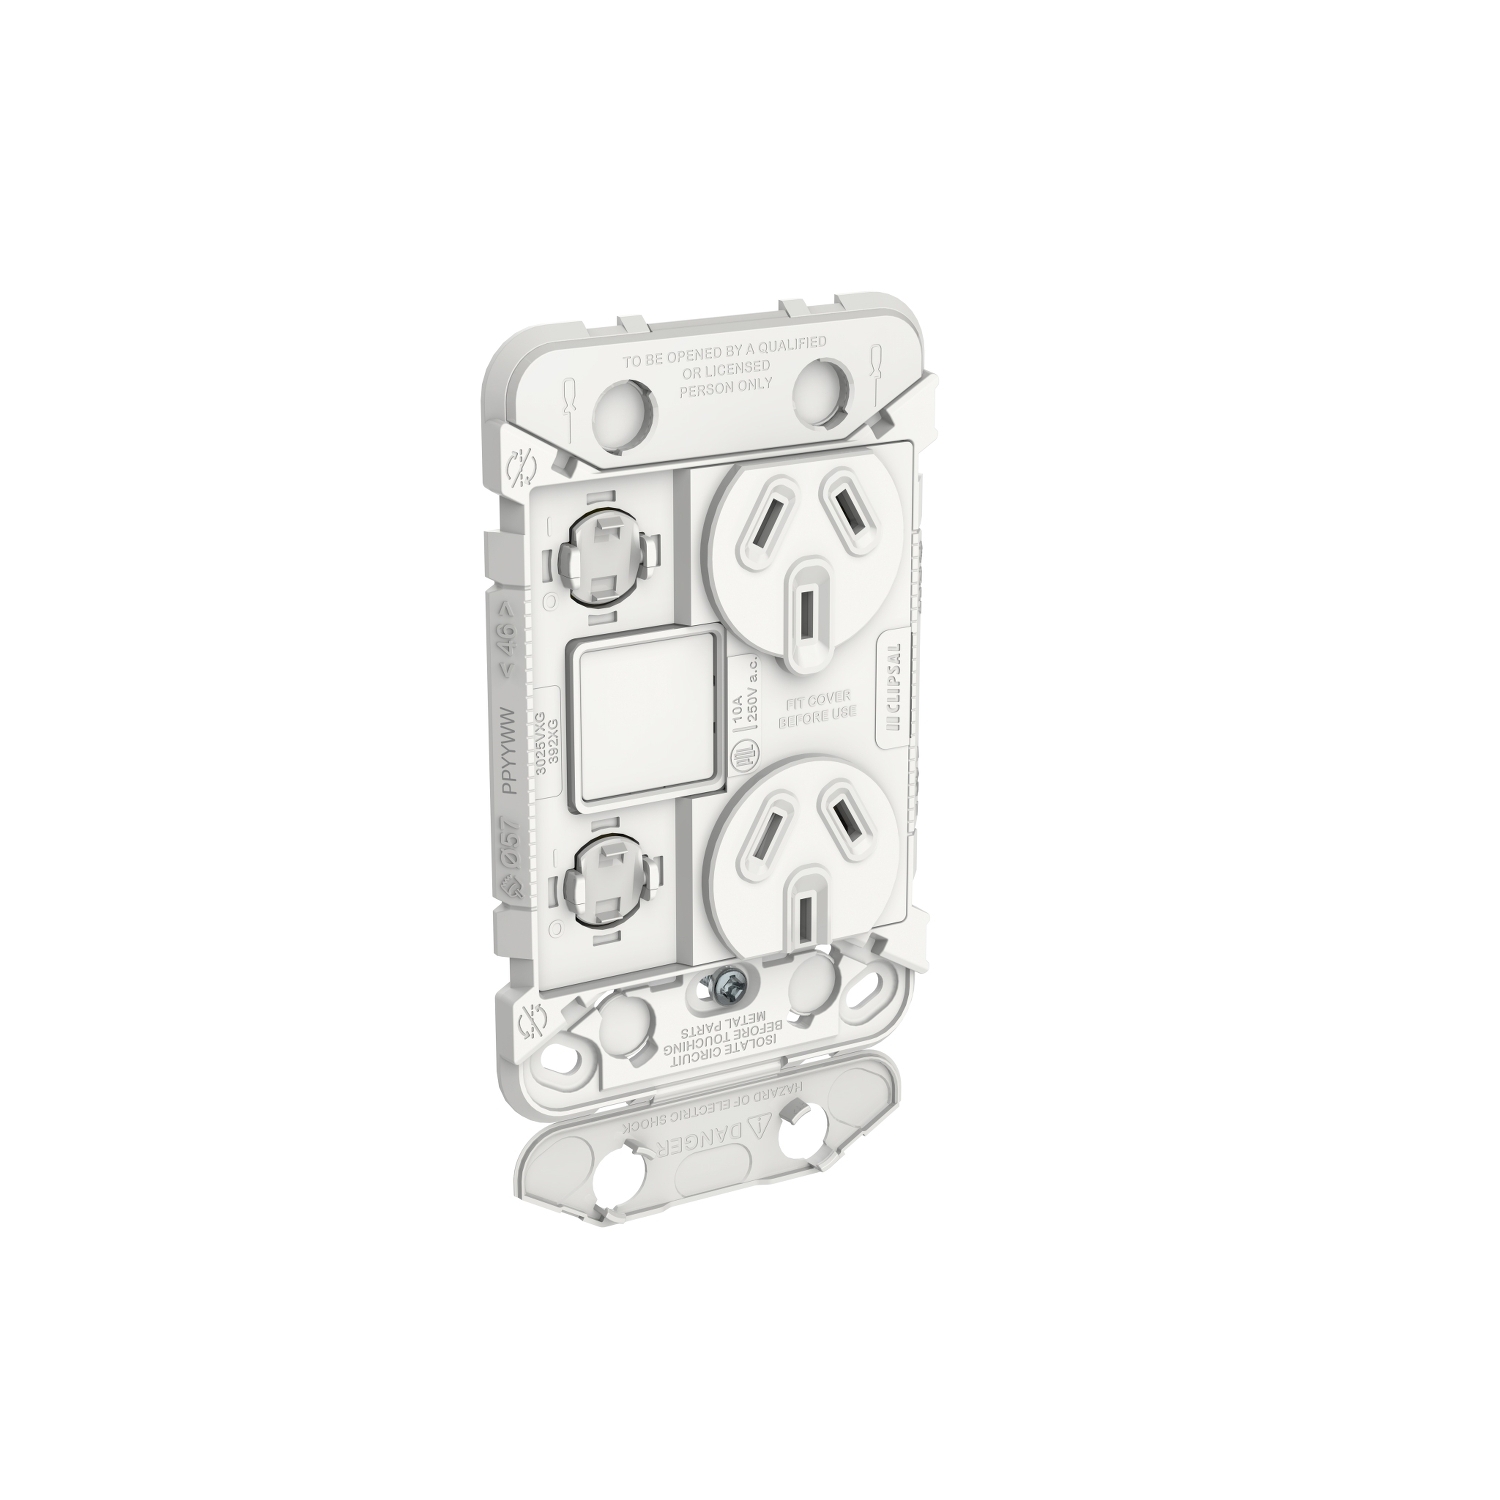 PDL Iconic, switched socket, 2 switch & 2 socket, 1G, vert, 10 A, Vivid White